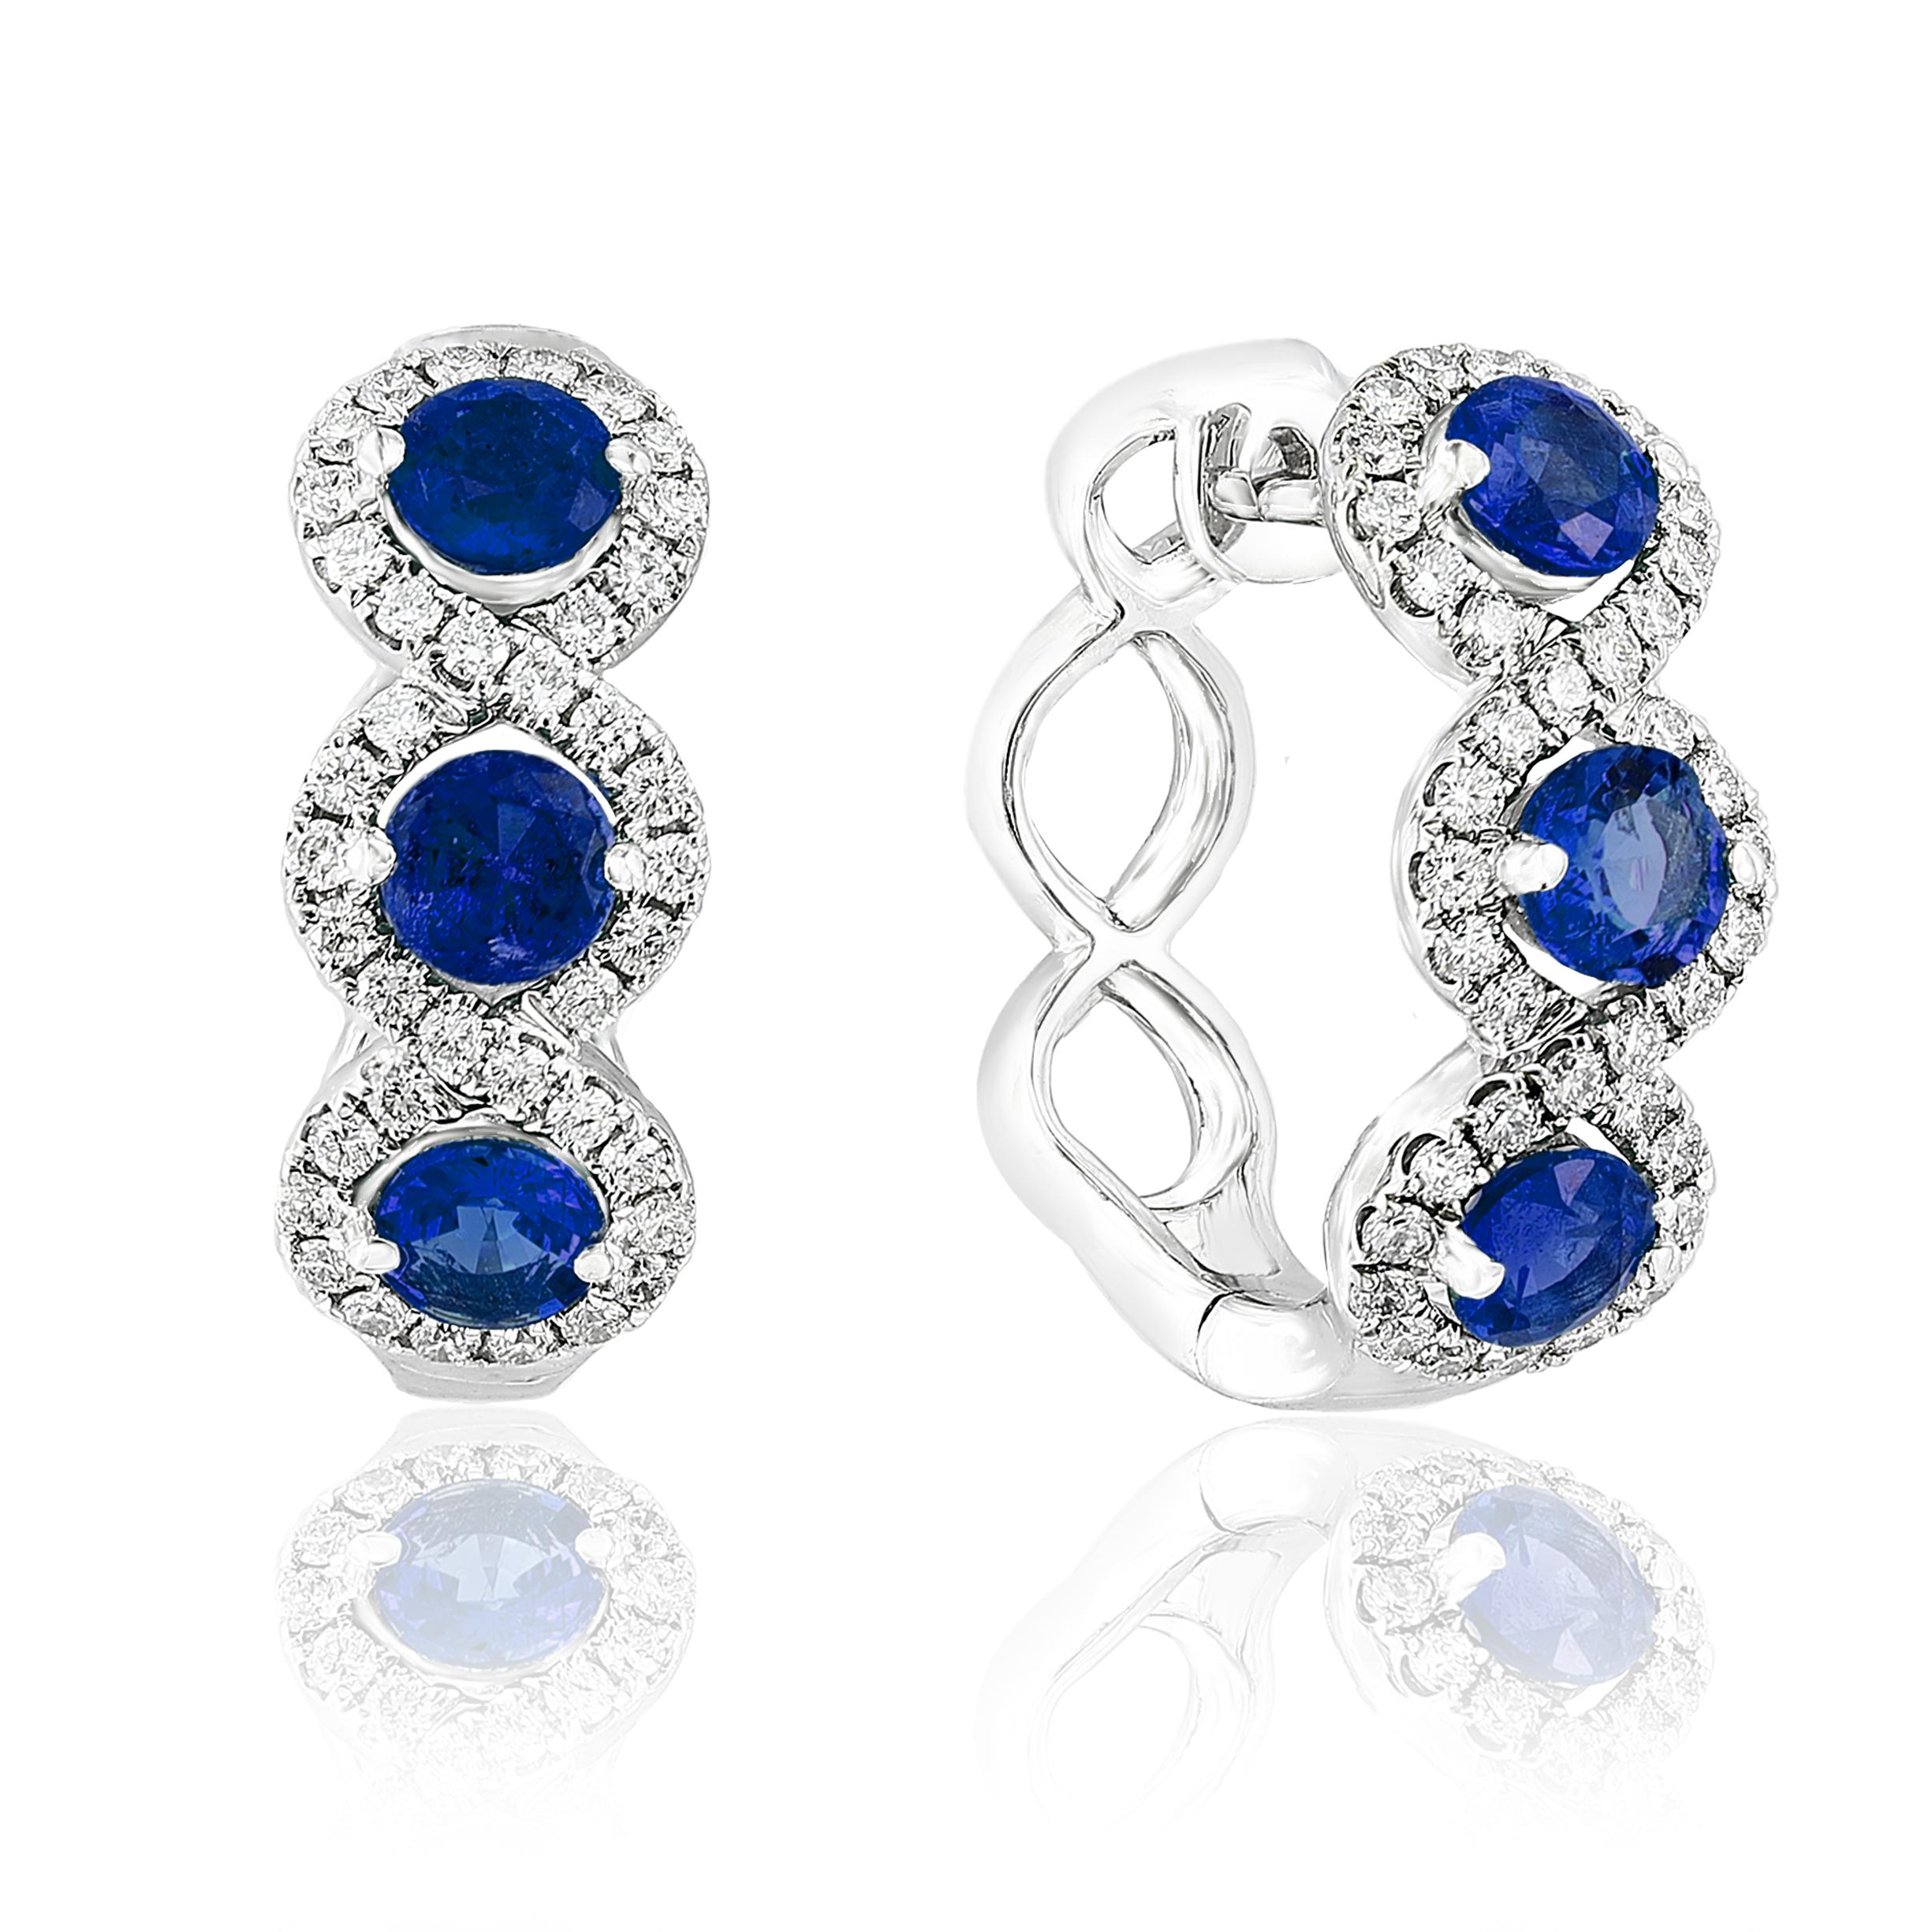 A chic and fashionable pair of hoop earrings showcasing brilliant-cut 6-round blue sapphire weighs 1.94 carats in total, set in 18k white gold.  76 Round diamonds surrounding the blue sapphires weigh 0.65 carats in total. A beautiful piece of